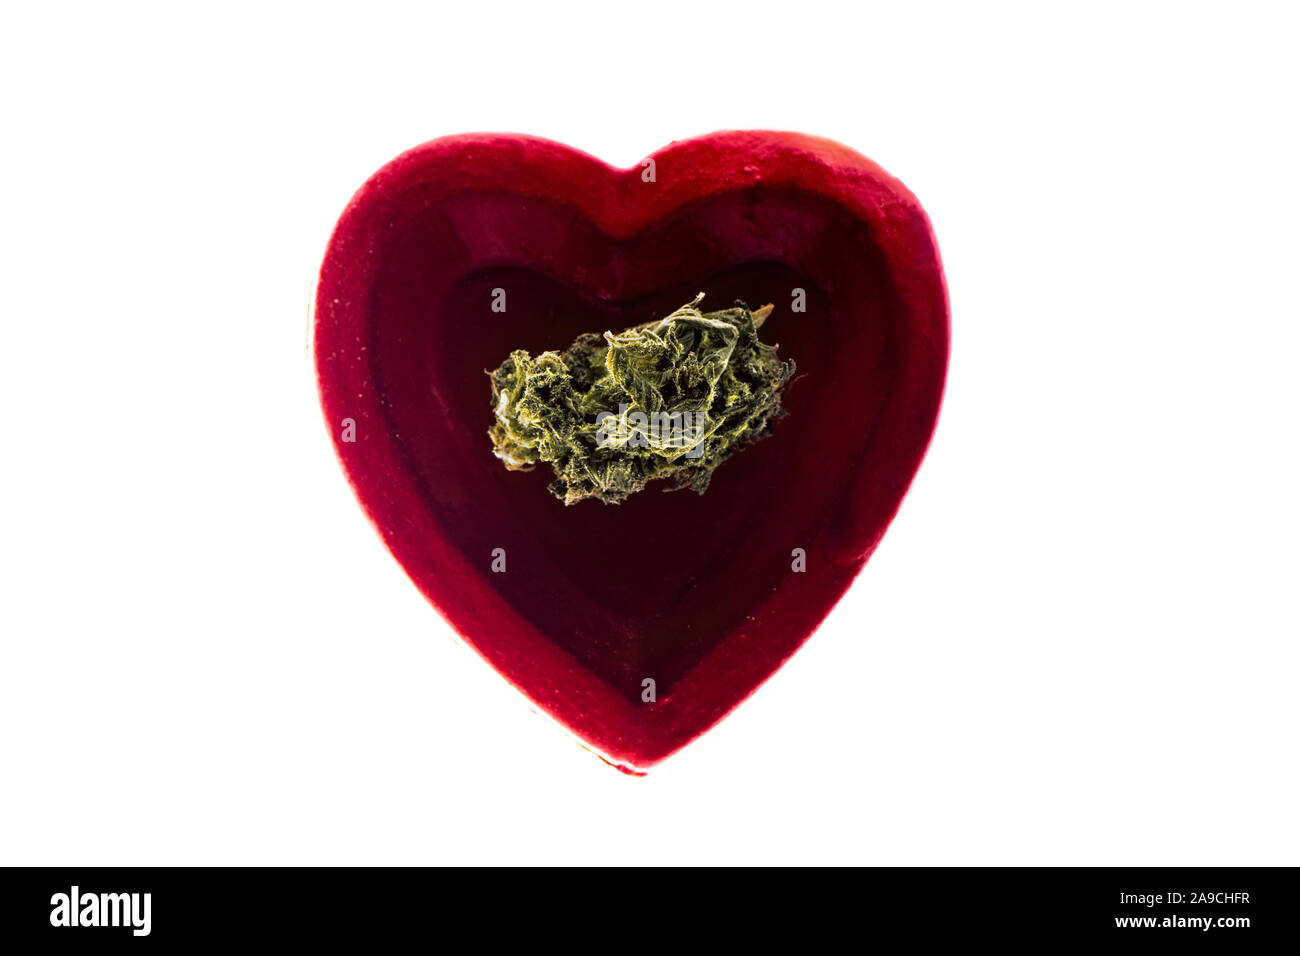 Dried cannabis buds CBD in red heart shape plate on white background. Copy space. Stock Photo